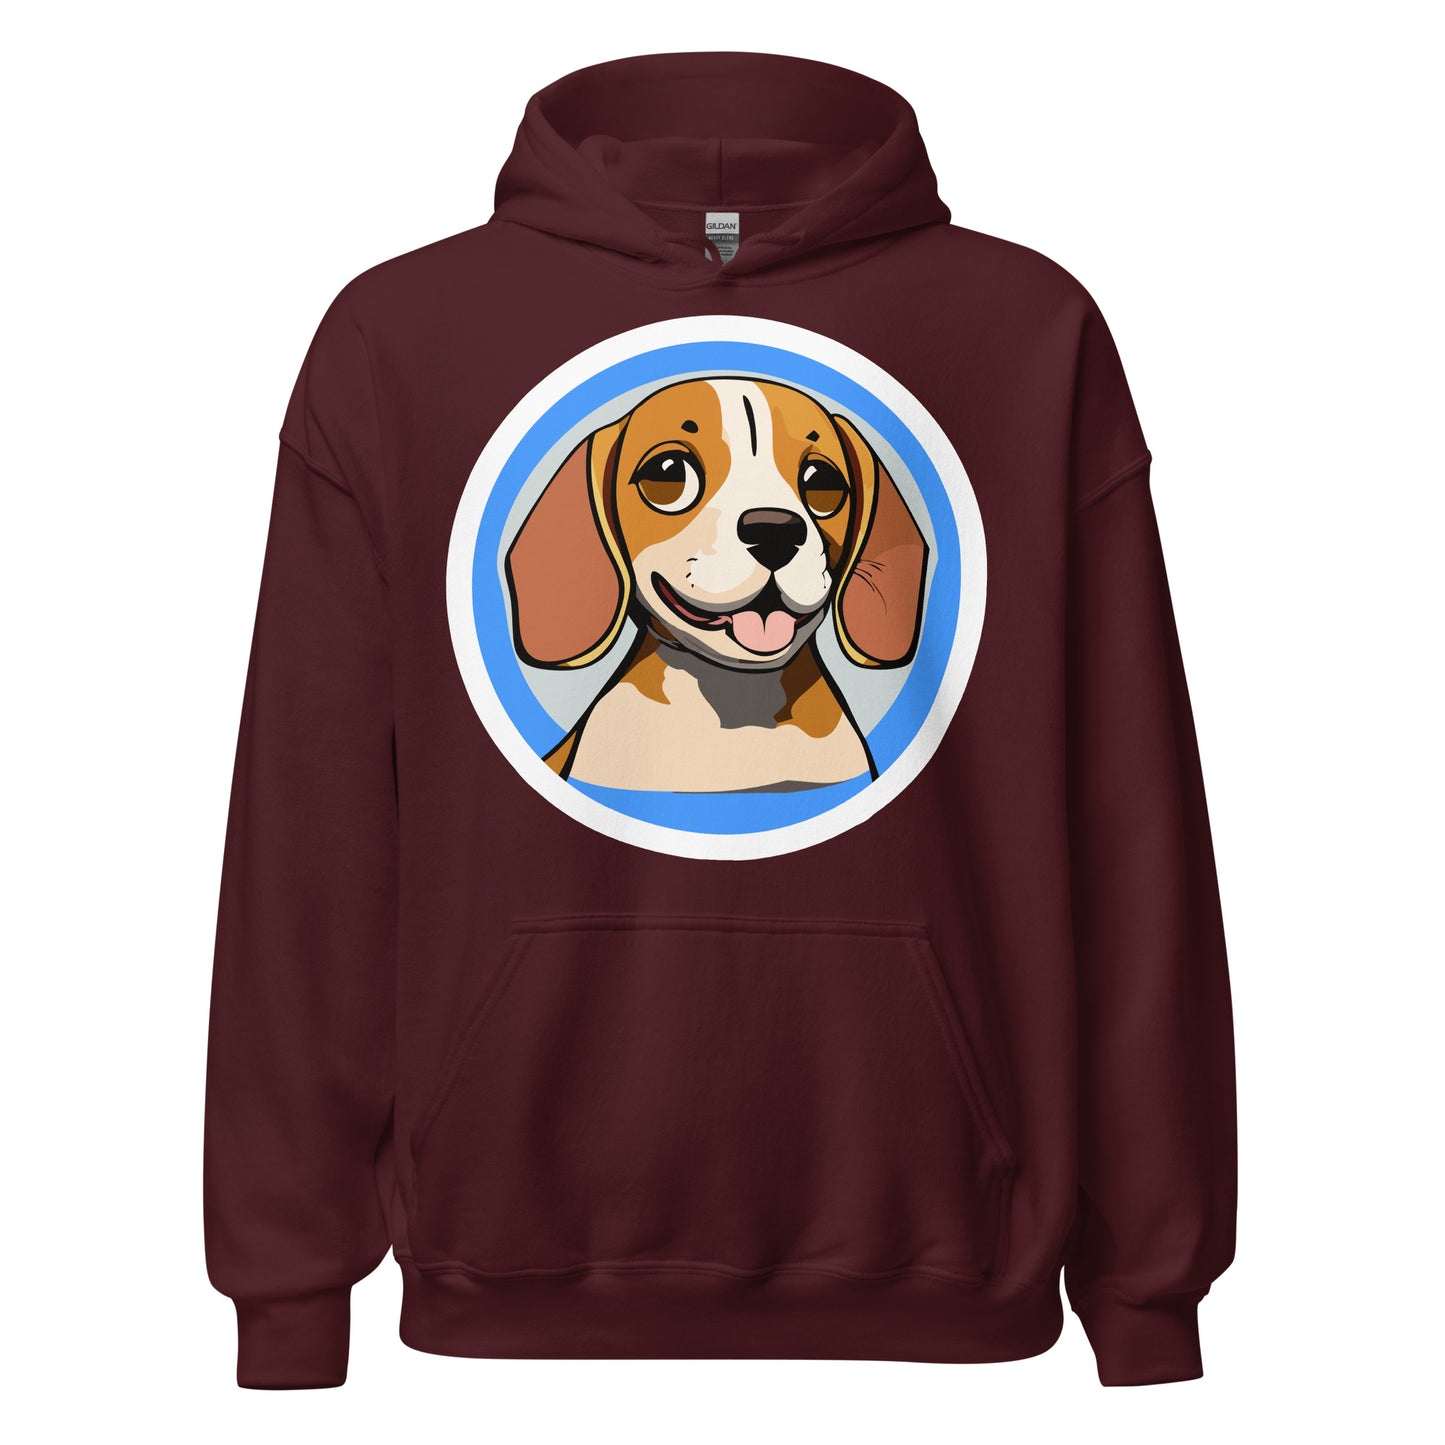 Comfy unisex hoodie for him or her with a cute beagle image, in maroon